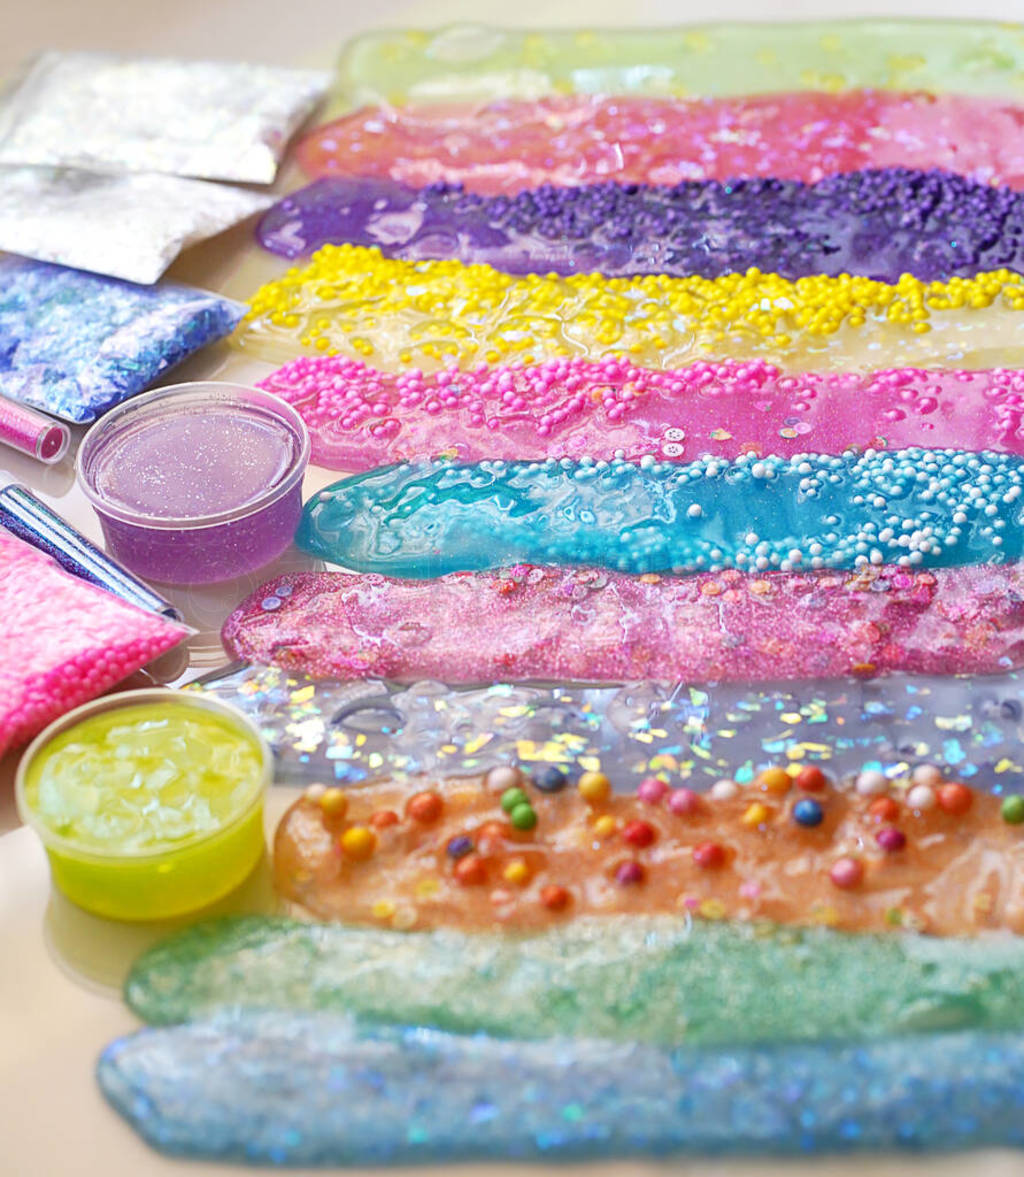 How to make fluffy slime at home, close up view.